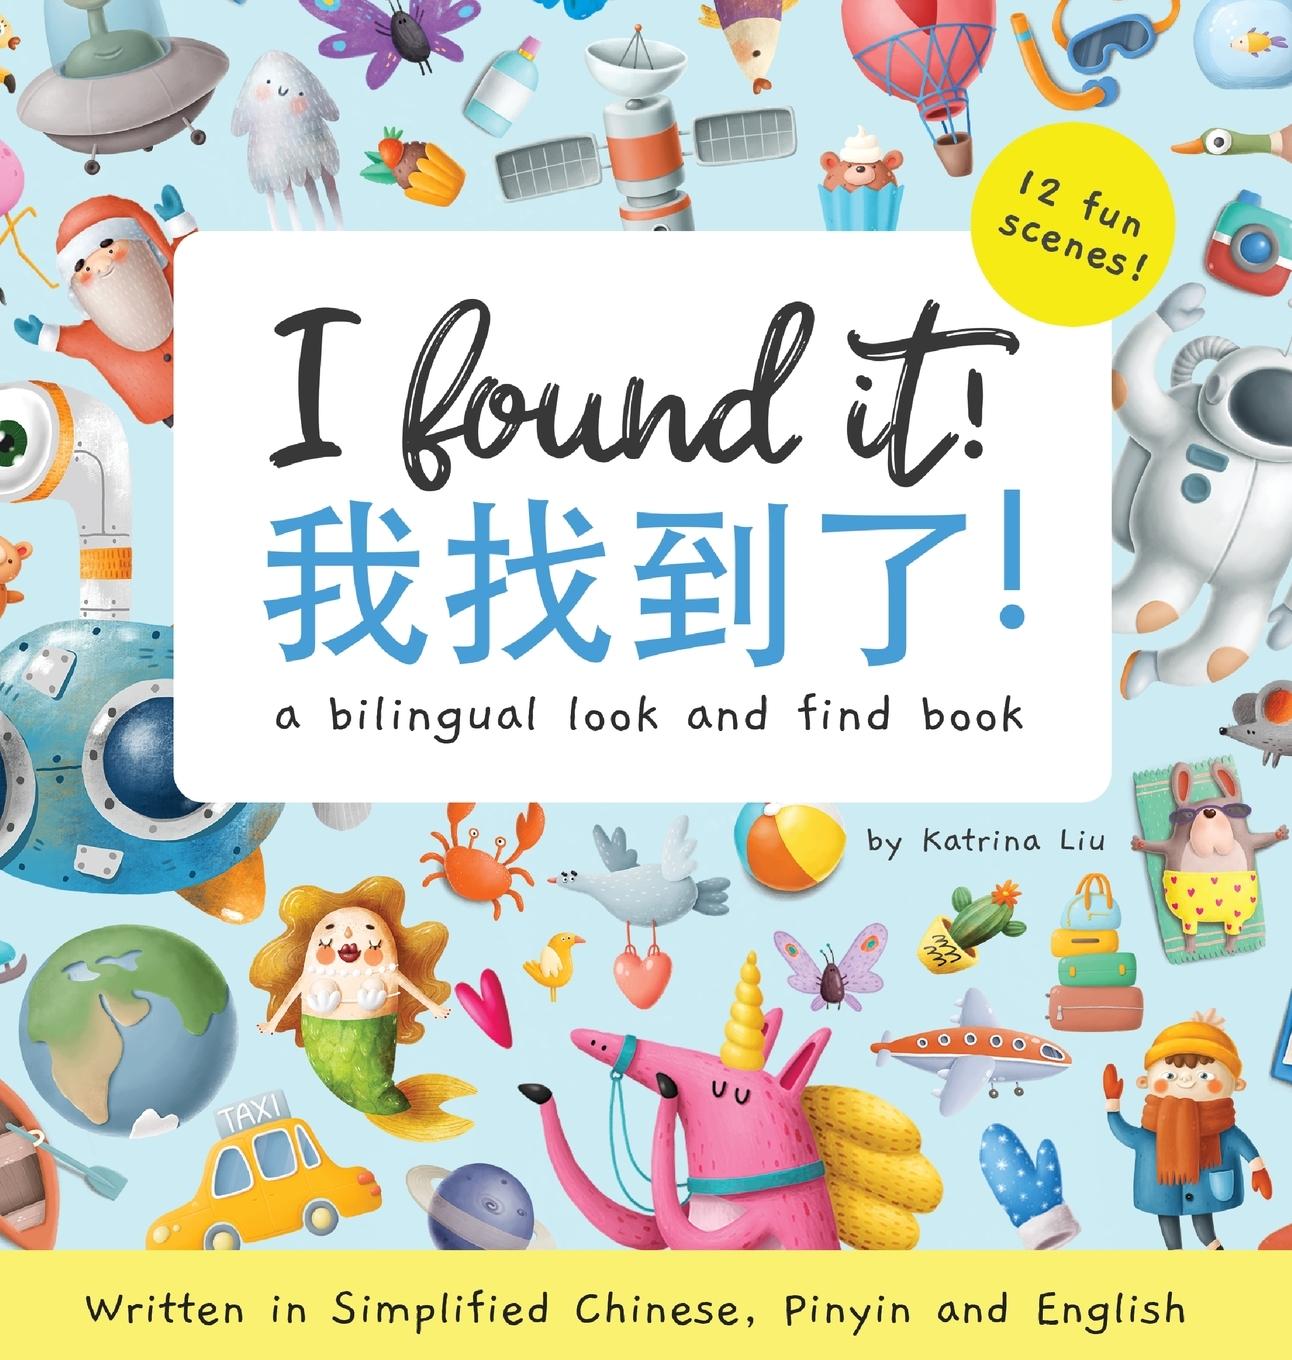 Book I found it! a bilingual look and find book written in Simplified Chinese, Pinyin and English 